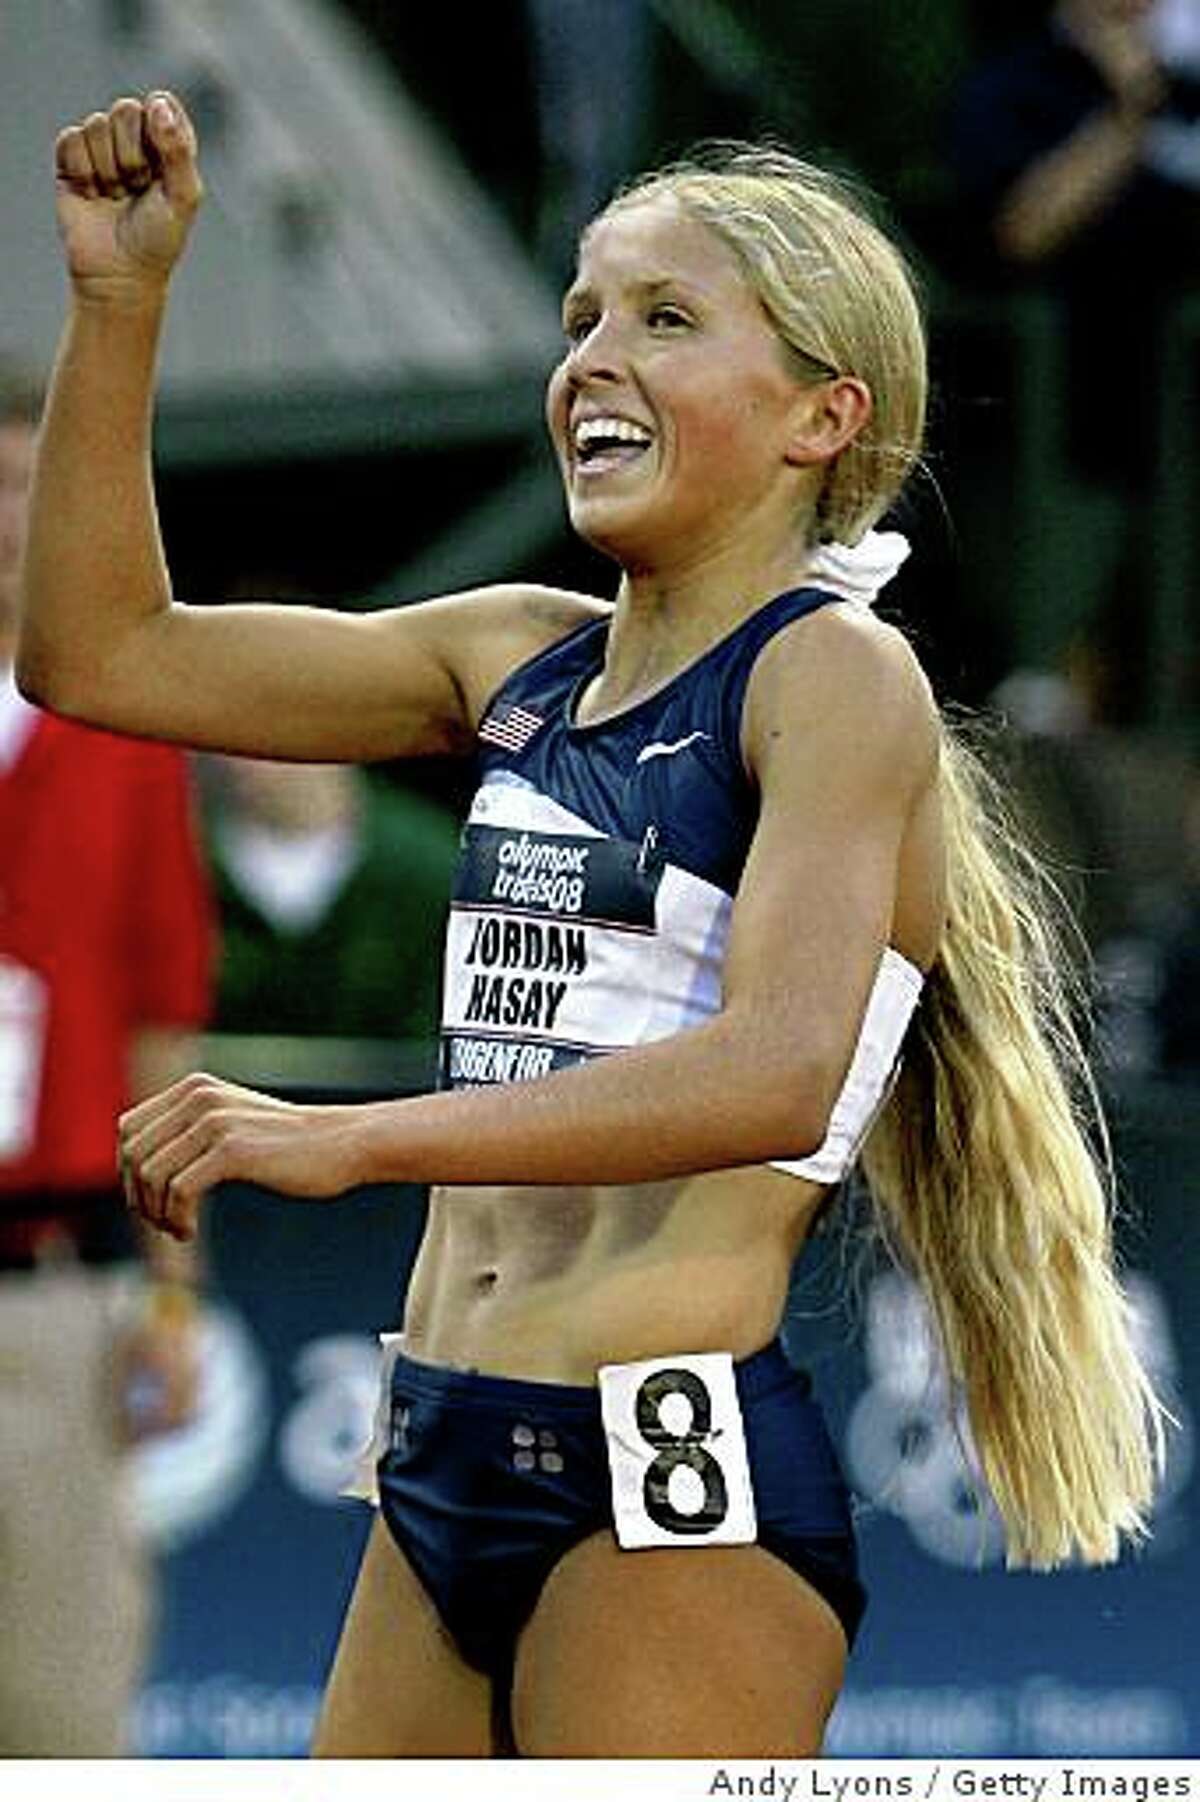 EUGENE, OR - JULY 04: Jordan Hasay celebrates after qualifying for the finals and a new American High School record time in the women's 1,500 meter semi-finals during day six of the U.S. Track and Field Olympic Trials at Hayward Field on July 4, 2008 in Eugene, Oregon. (Photo by Andy Lyons/Getty Images)